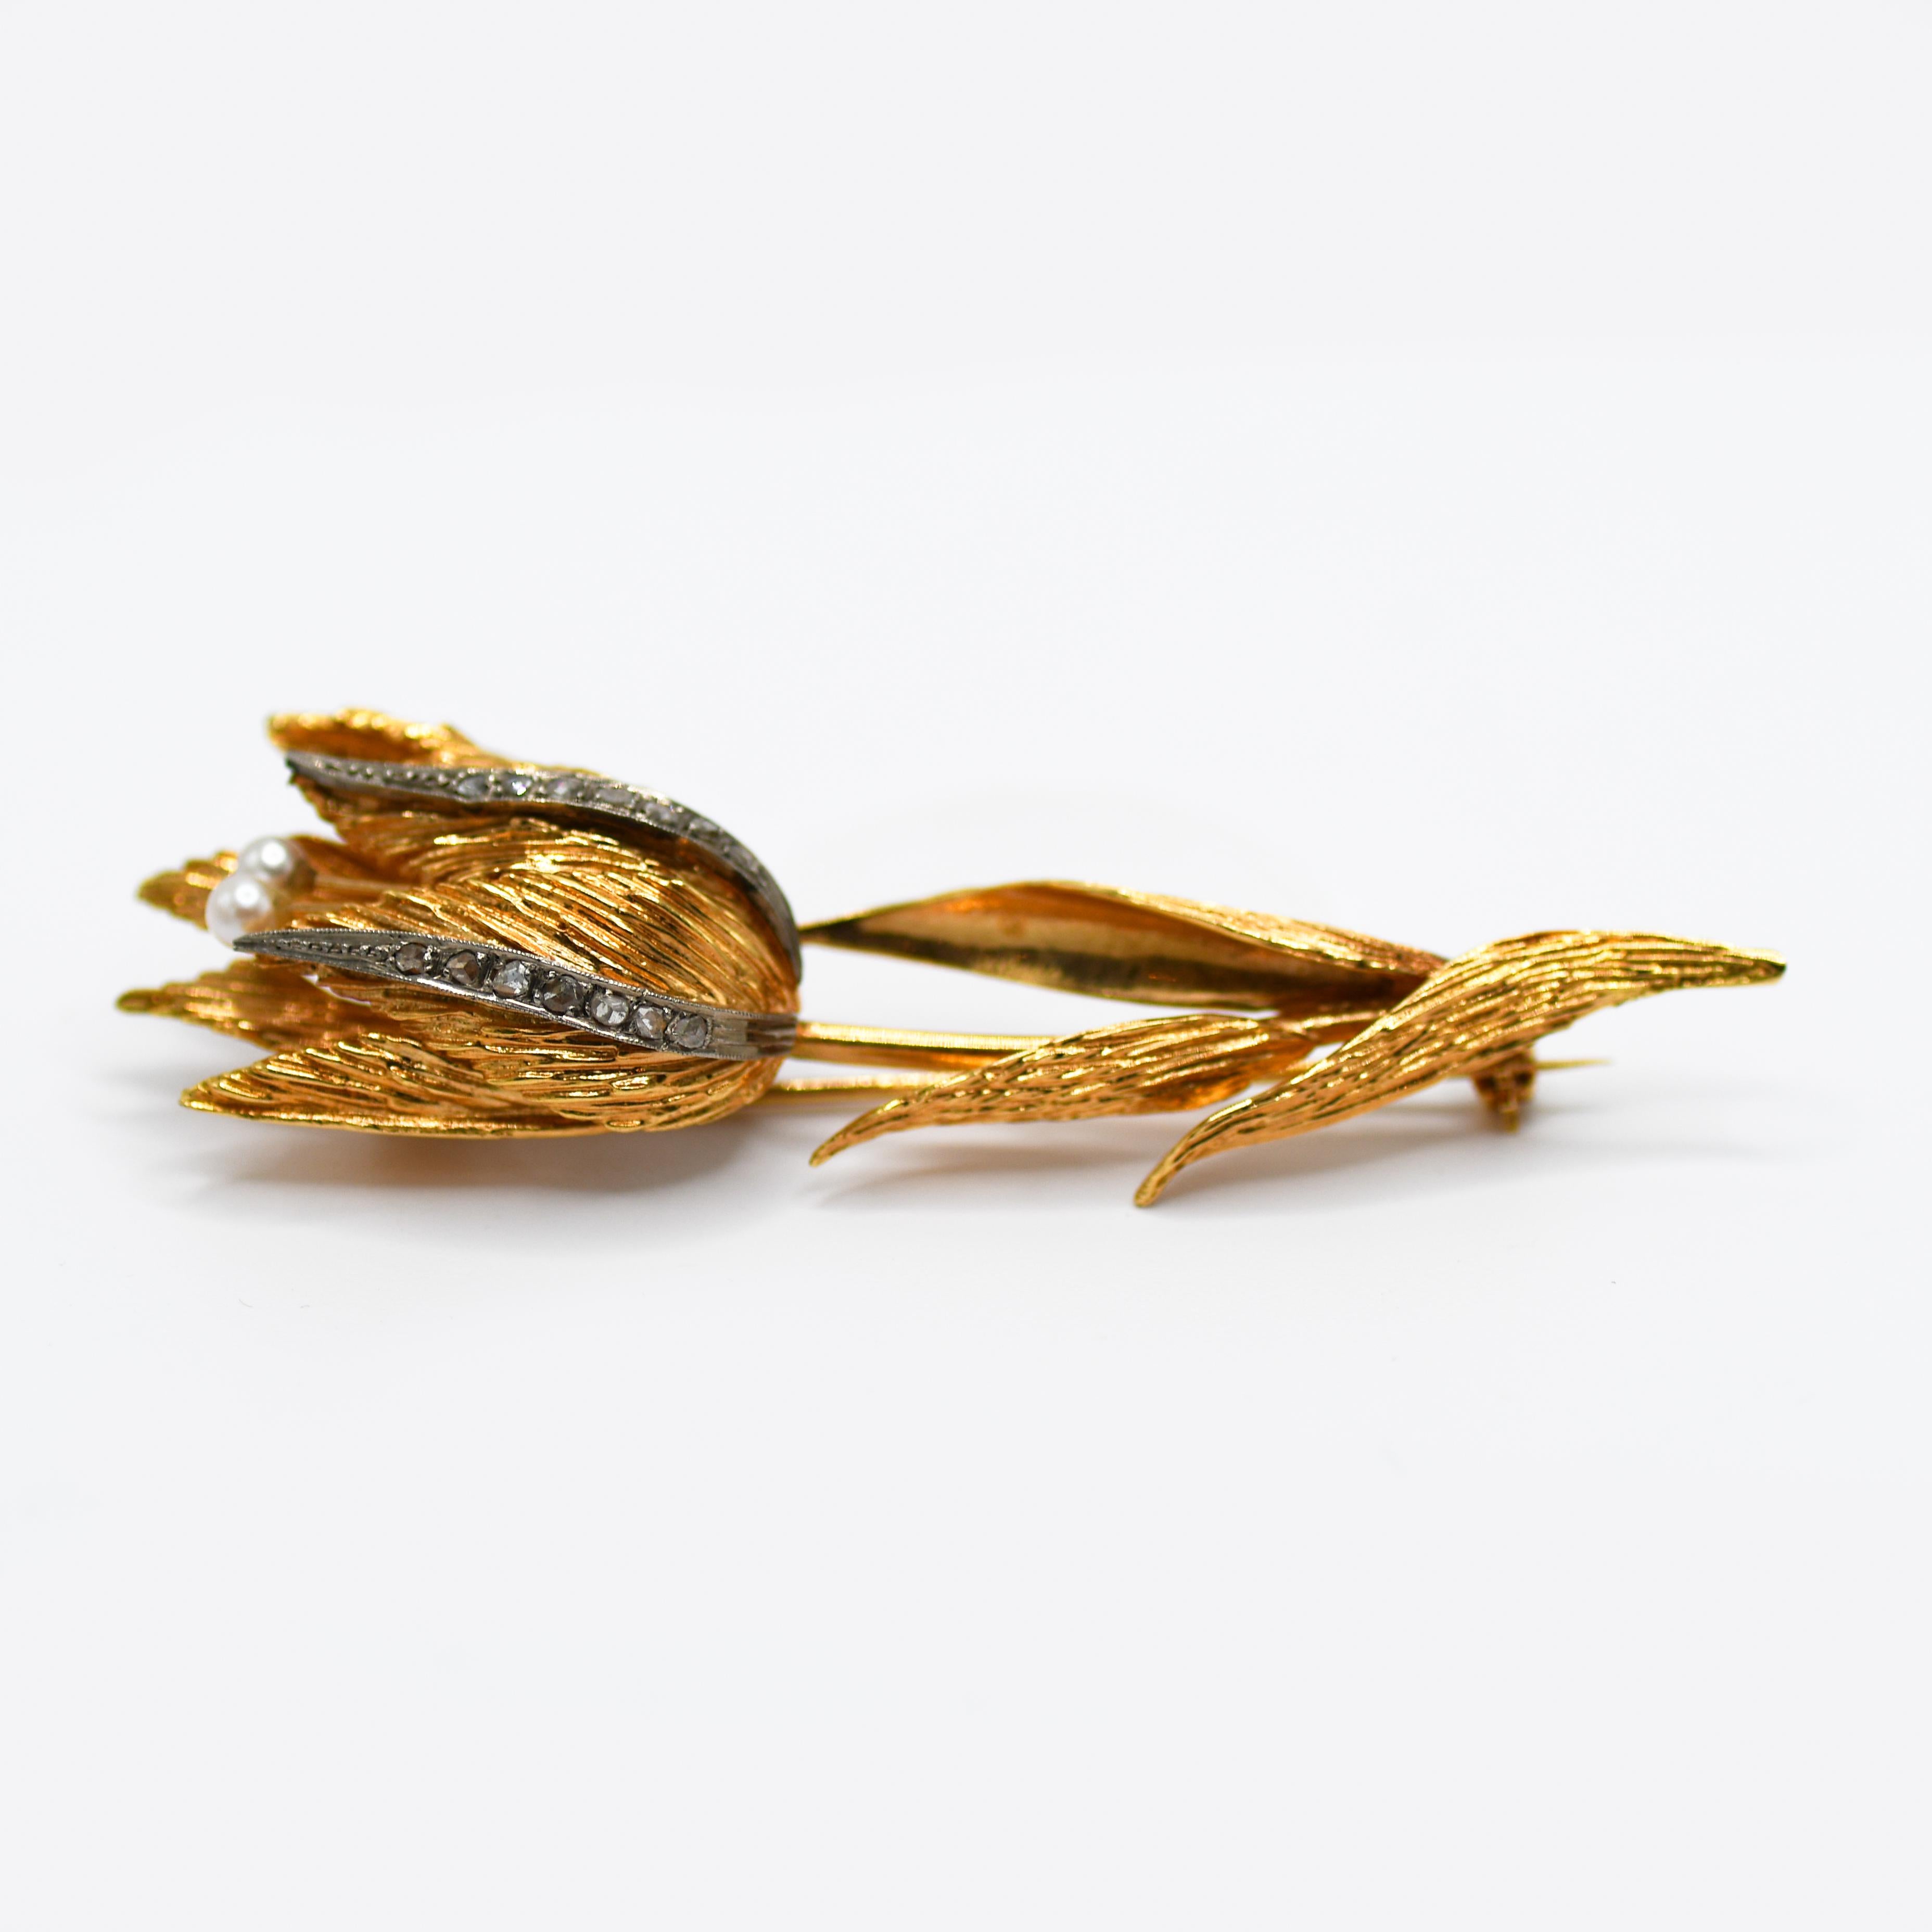 18k Yellow Gold Floral Brooch, 12.1gr
18k yellow gold floral brooch with small rose cut diamonds.
Weighs 12.1gr
2 3/4